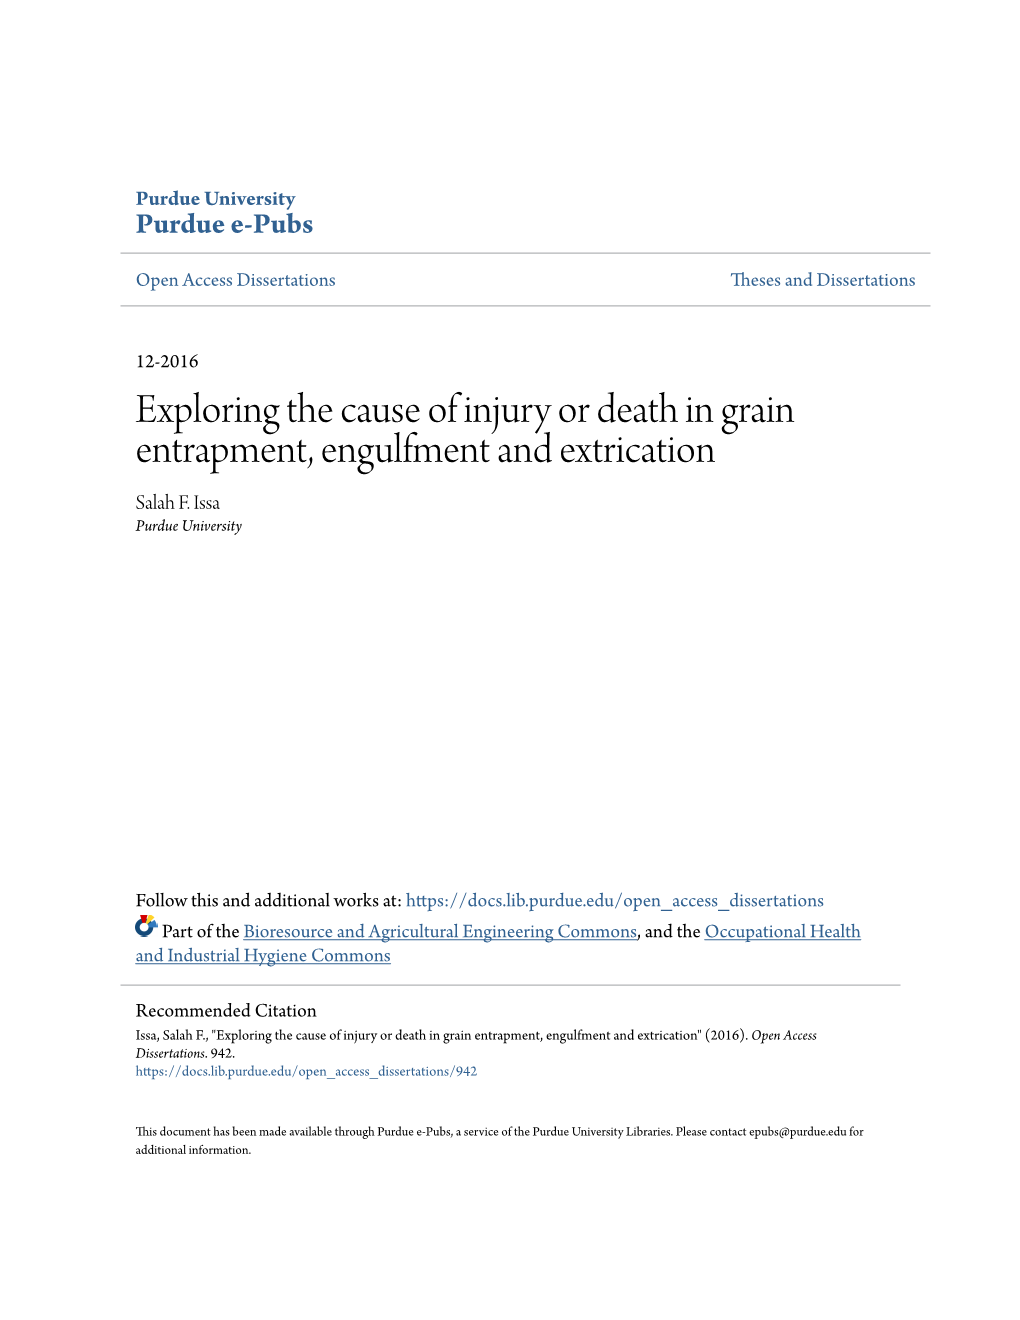 Exploring the Cause of Injury Or Death in Grain Entrapment, Engulfment and Extrication Salah F